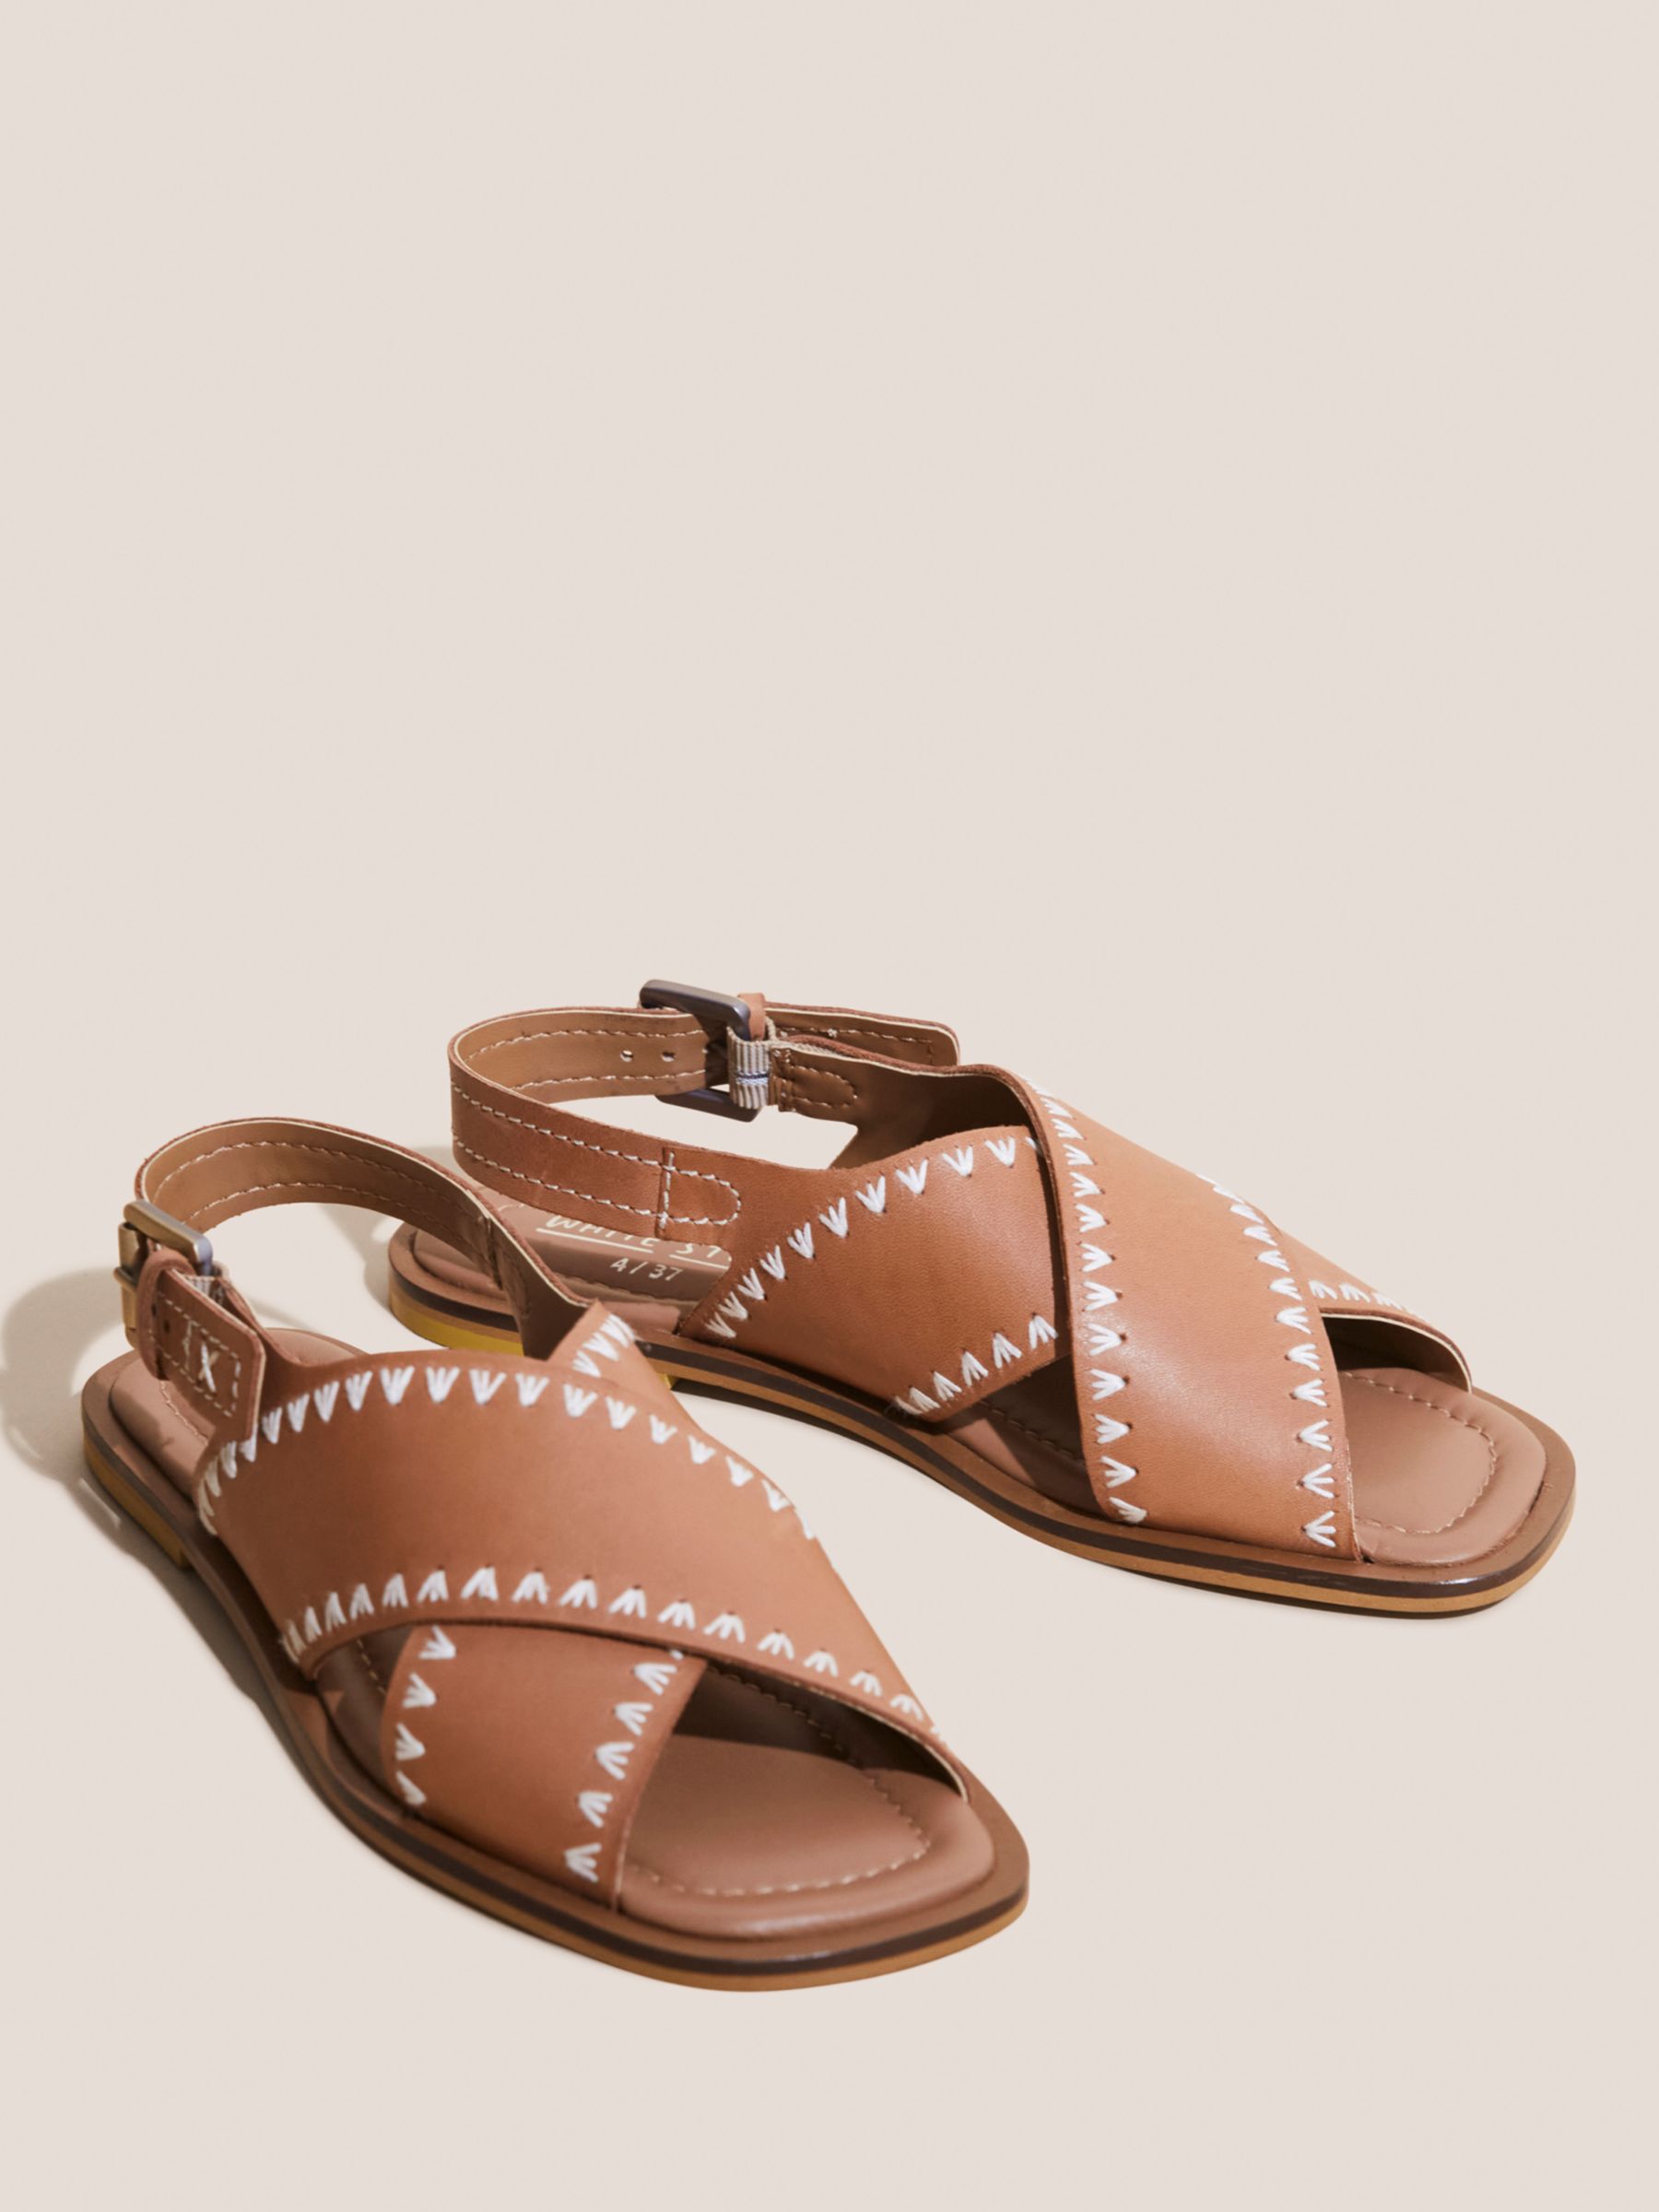 Buy White Stuff Craft Leather Sandals, Tan Online at johnlewis.com